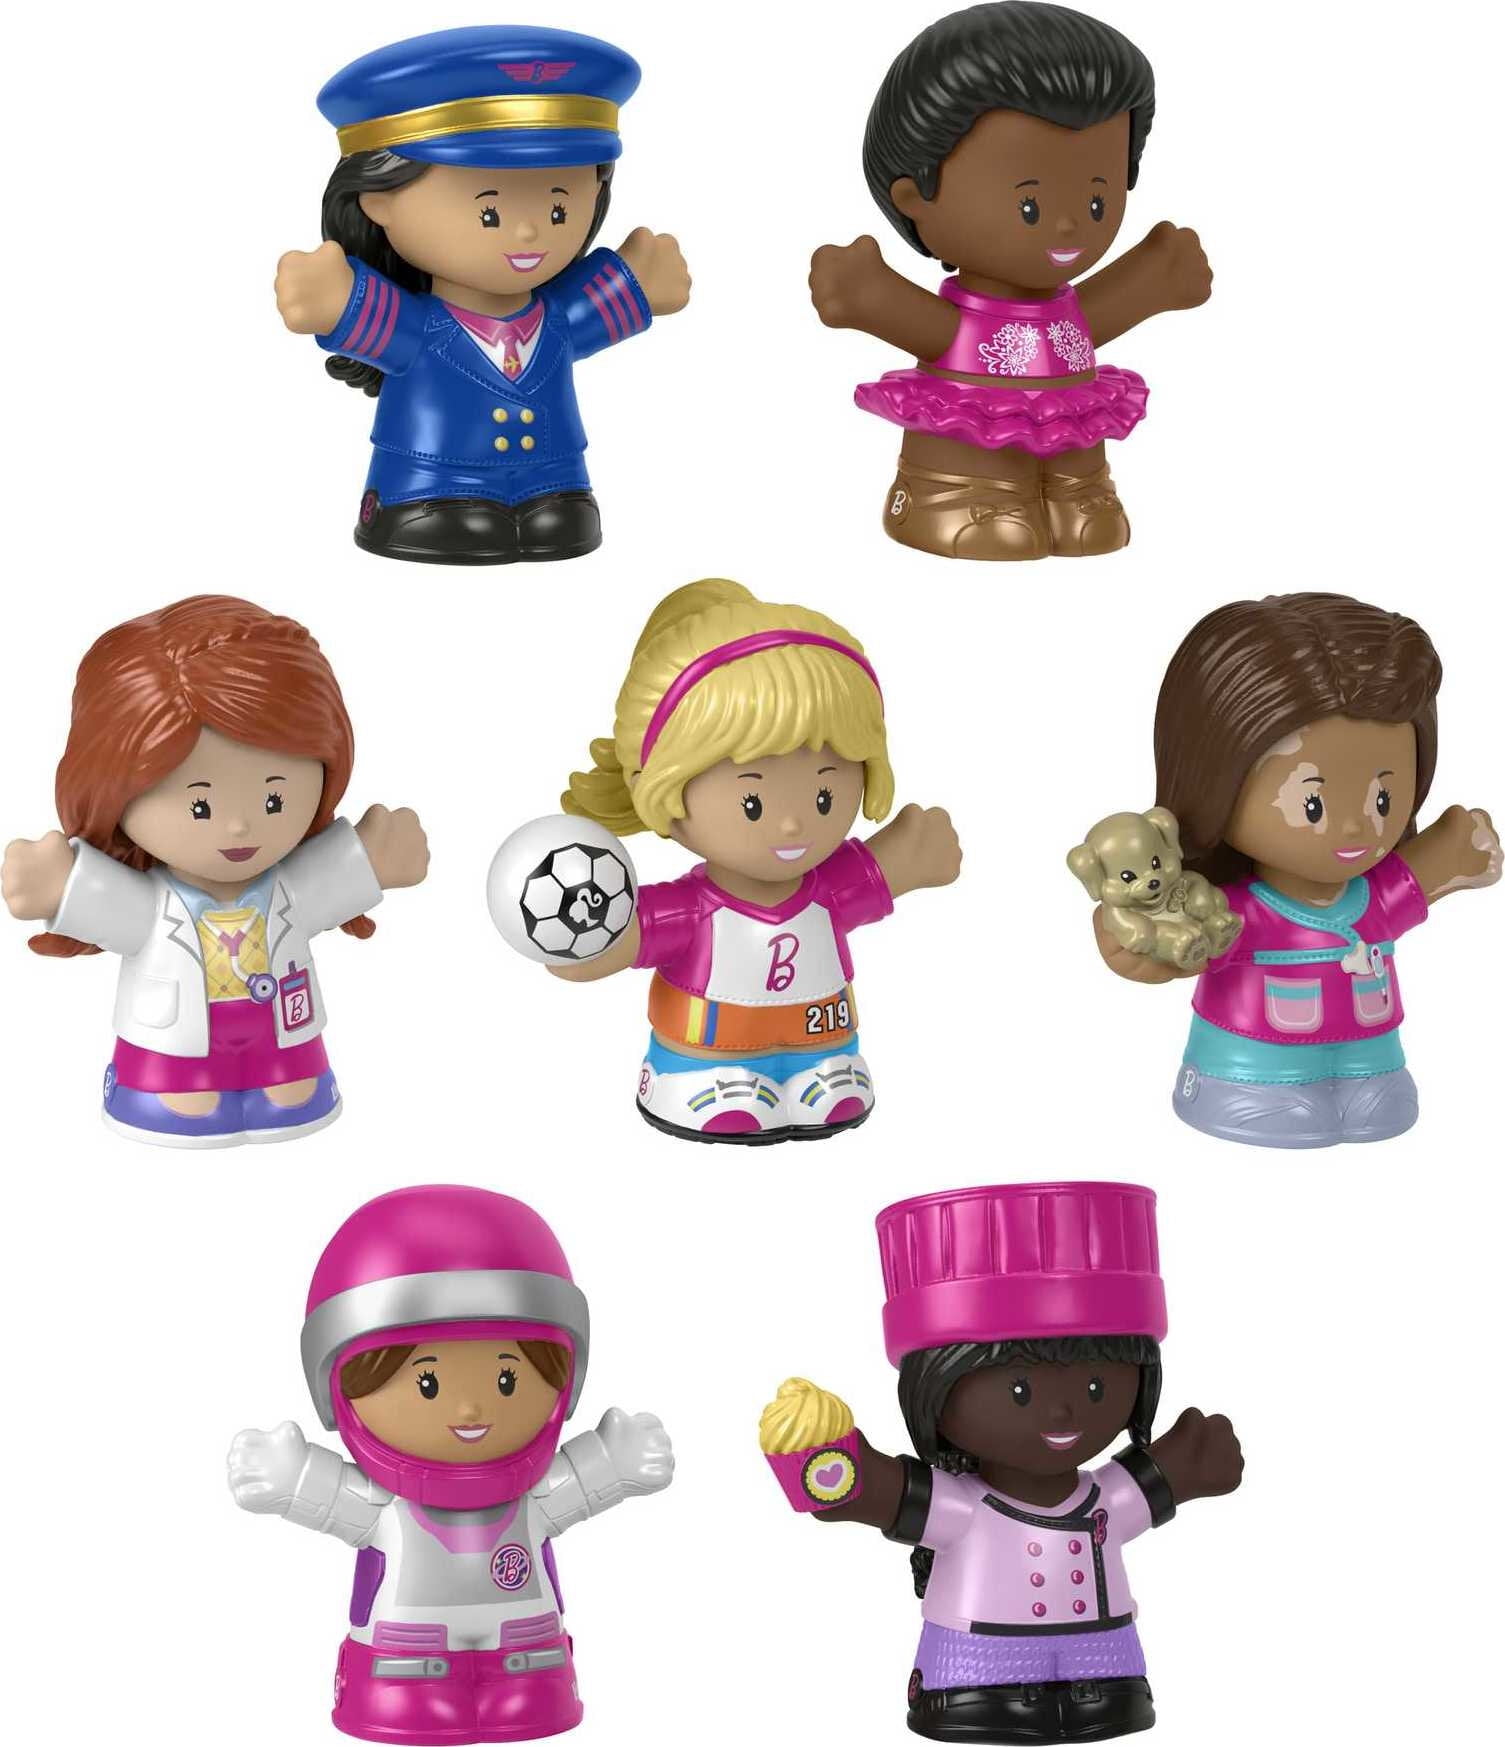 Barbie You Can Be Anything Figure Pack by Fisher-Price Little People, Gift Set of 7 Figures for Toddler and Preschool Pretend Play